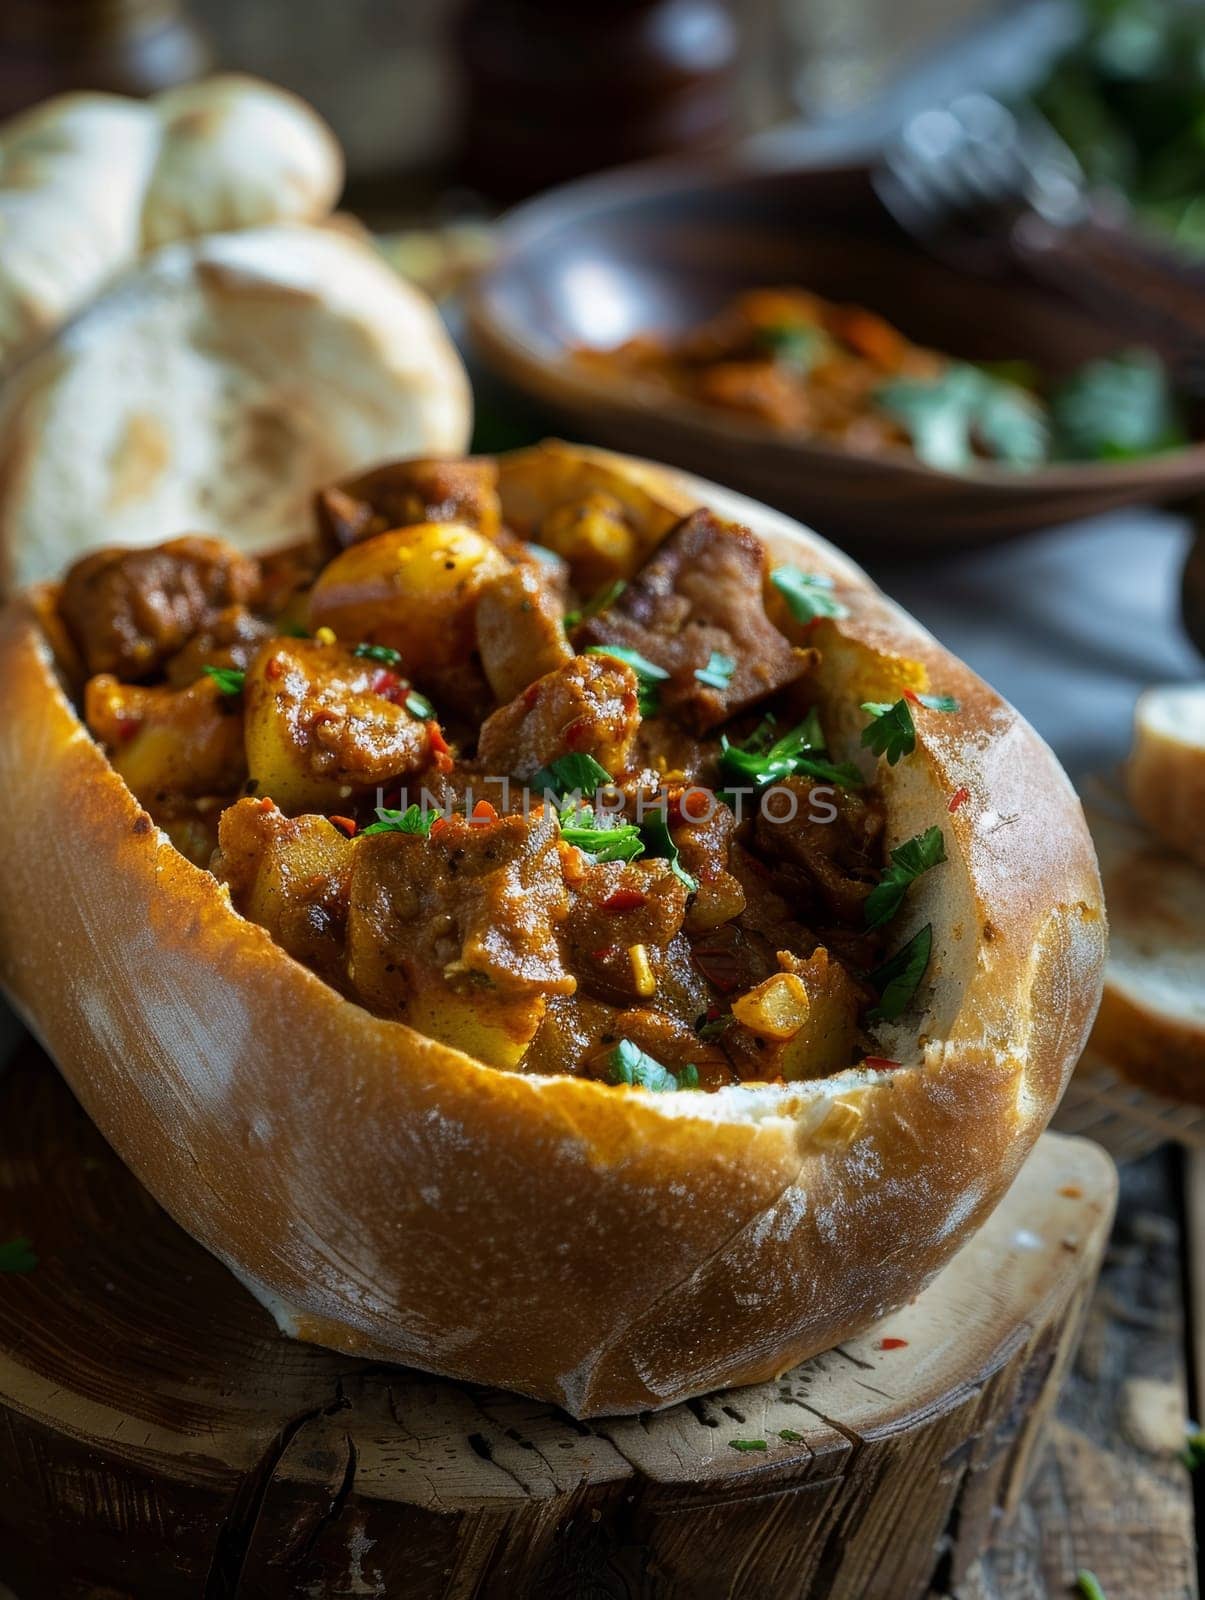 South African bunny chow, a hollowed-out bread loaf filled with a spicy, fragrant meat curry. Iconic street food dish represents the vibrant culinary heritage and comfort food traditions of Africa. by sfinks